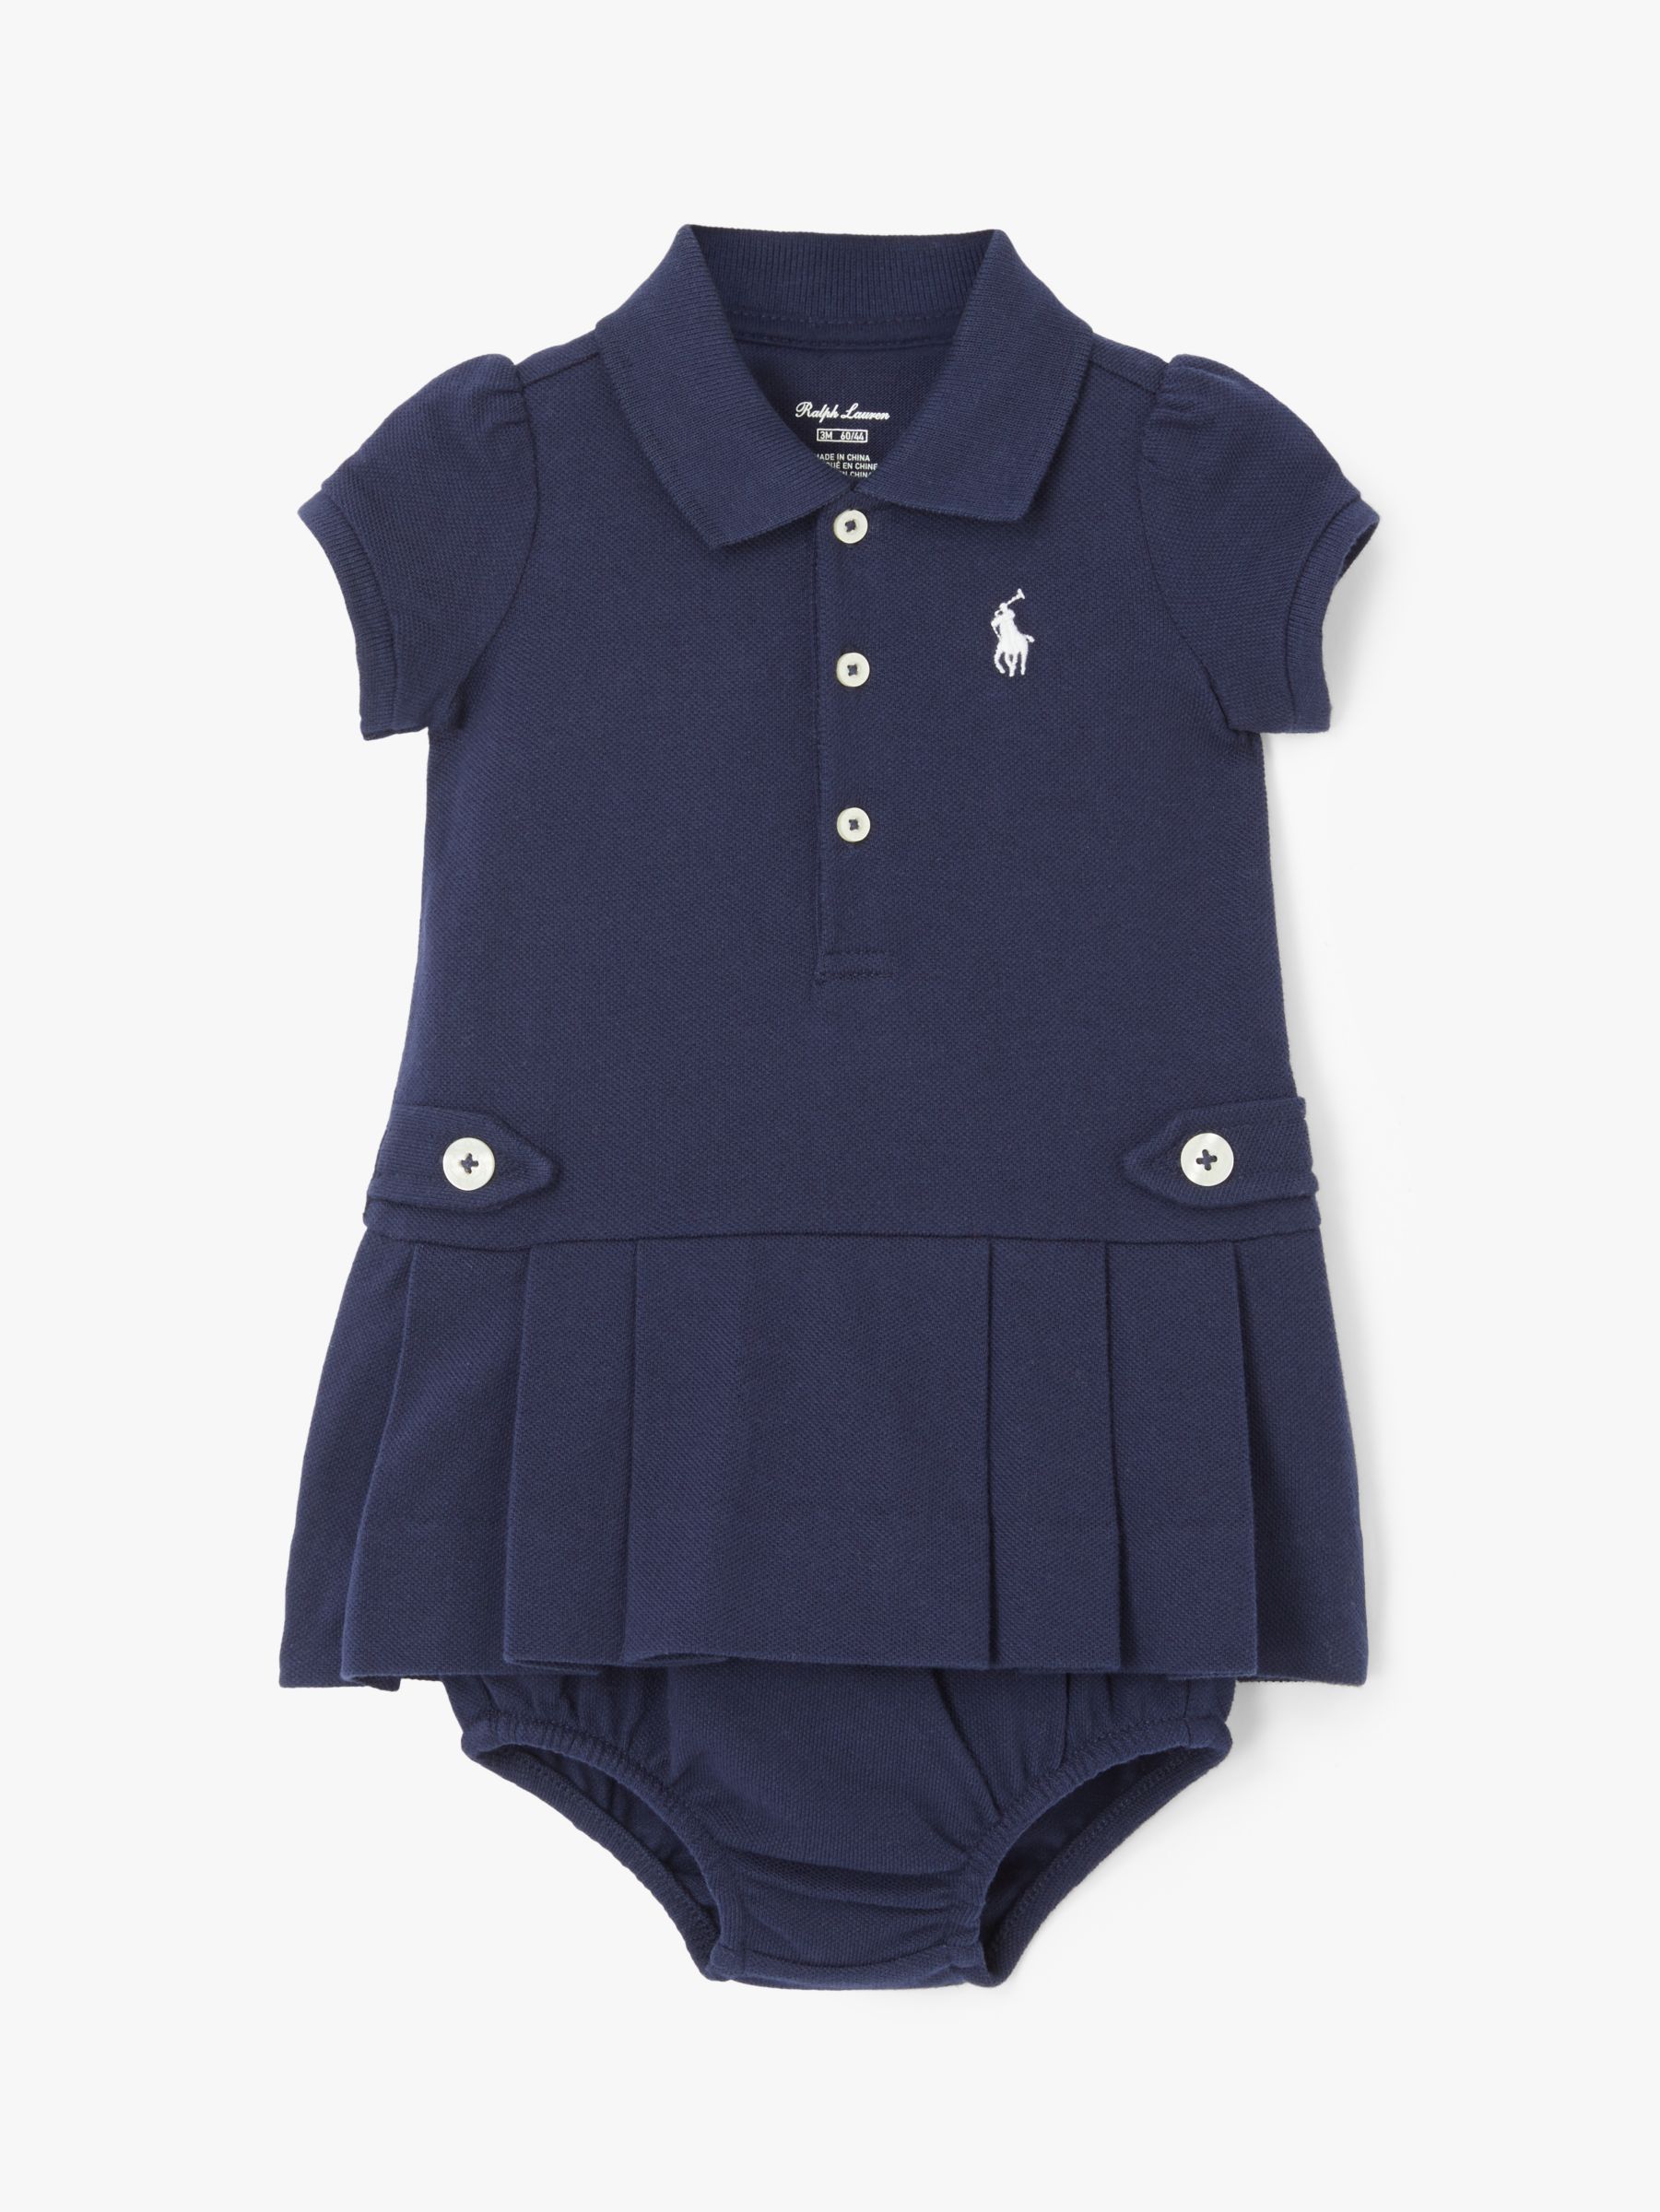 Polo Ralph Lauren Baby Polo Dress at 